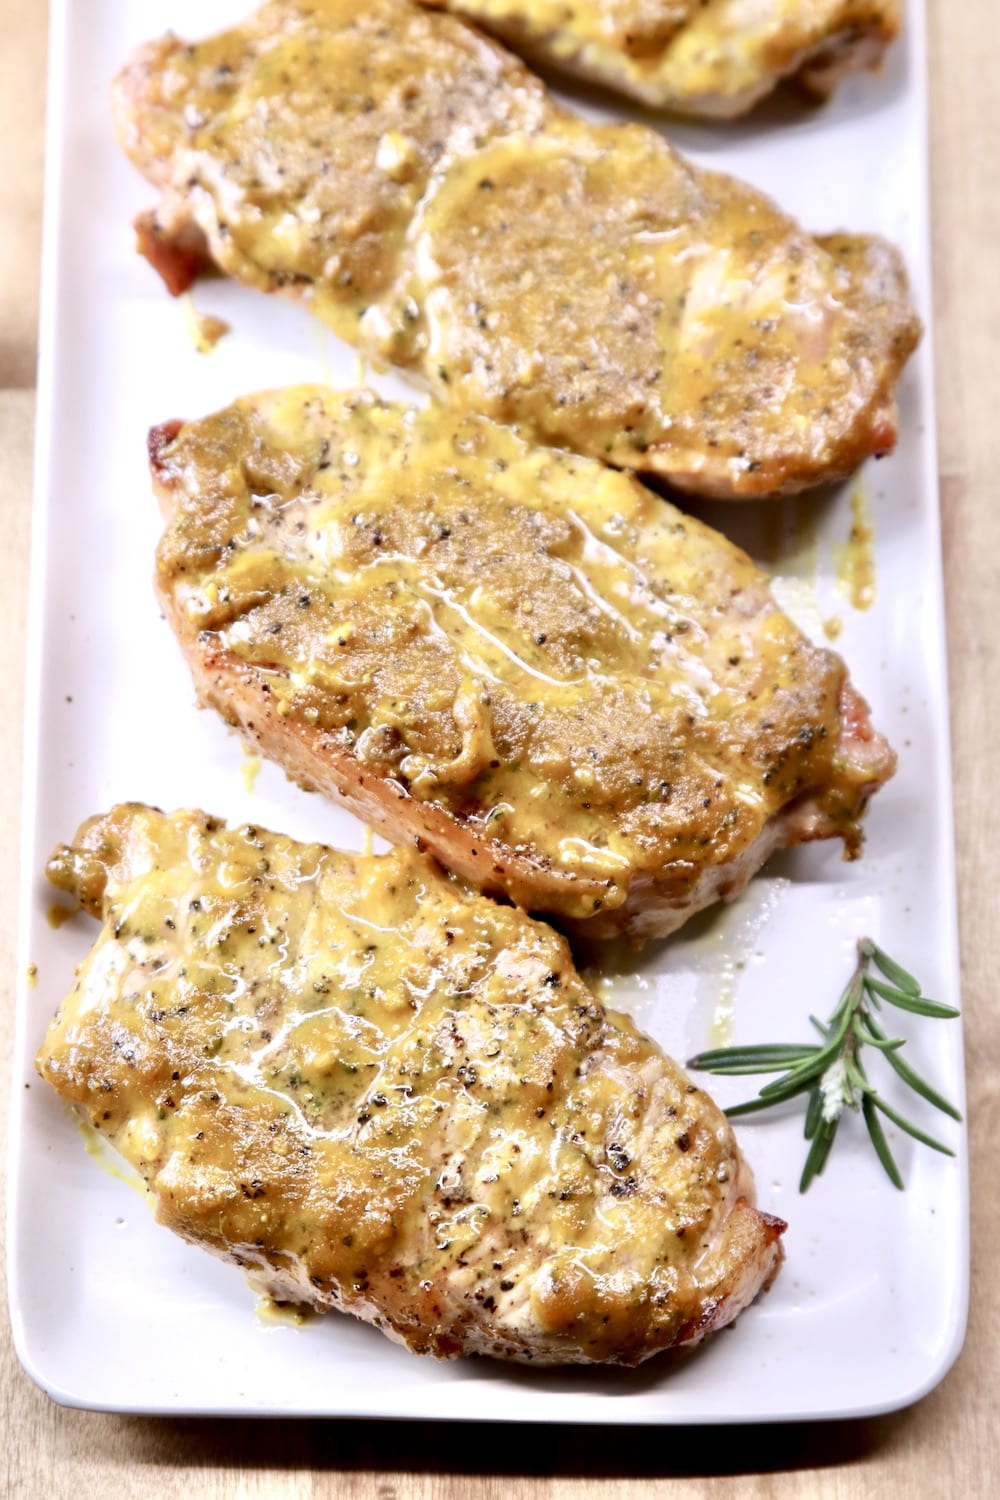 Platter of mustard grilled pork chops with sprig of rosemary